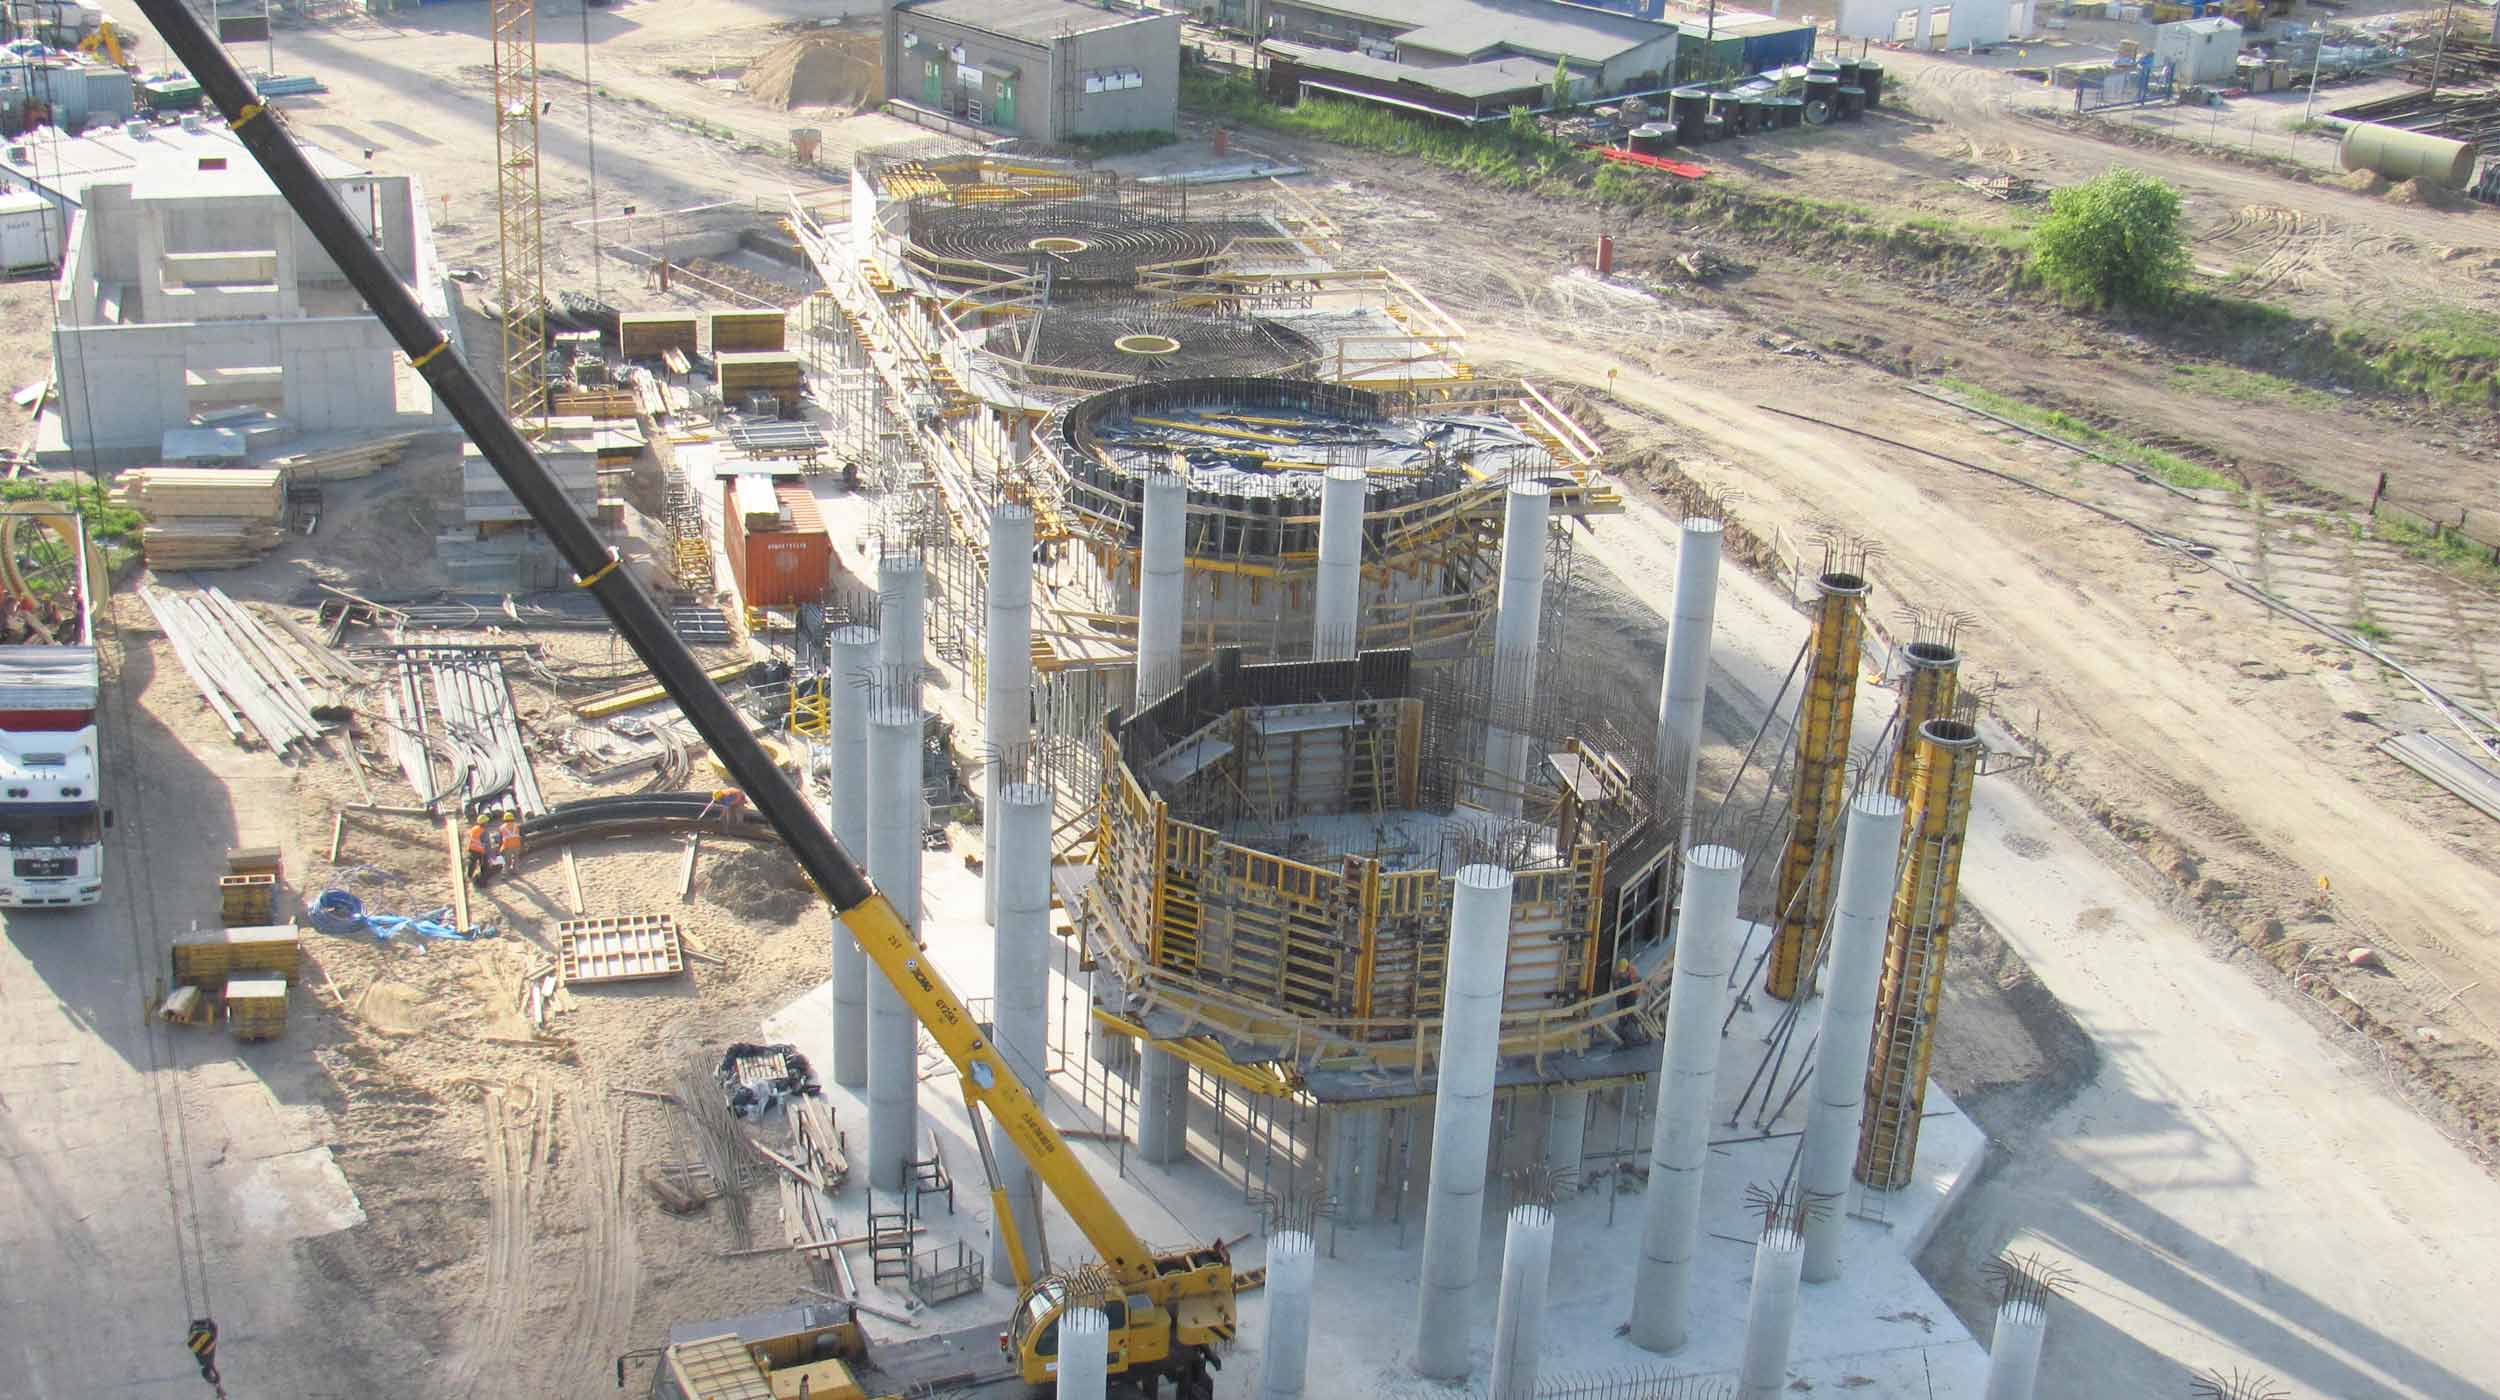 The project encompasses the construction of a biomass energy power station with 50 MW power capacity.